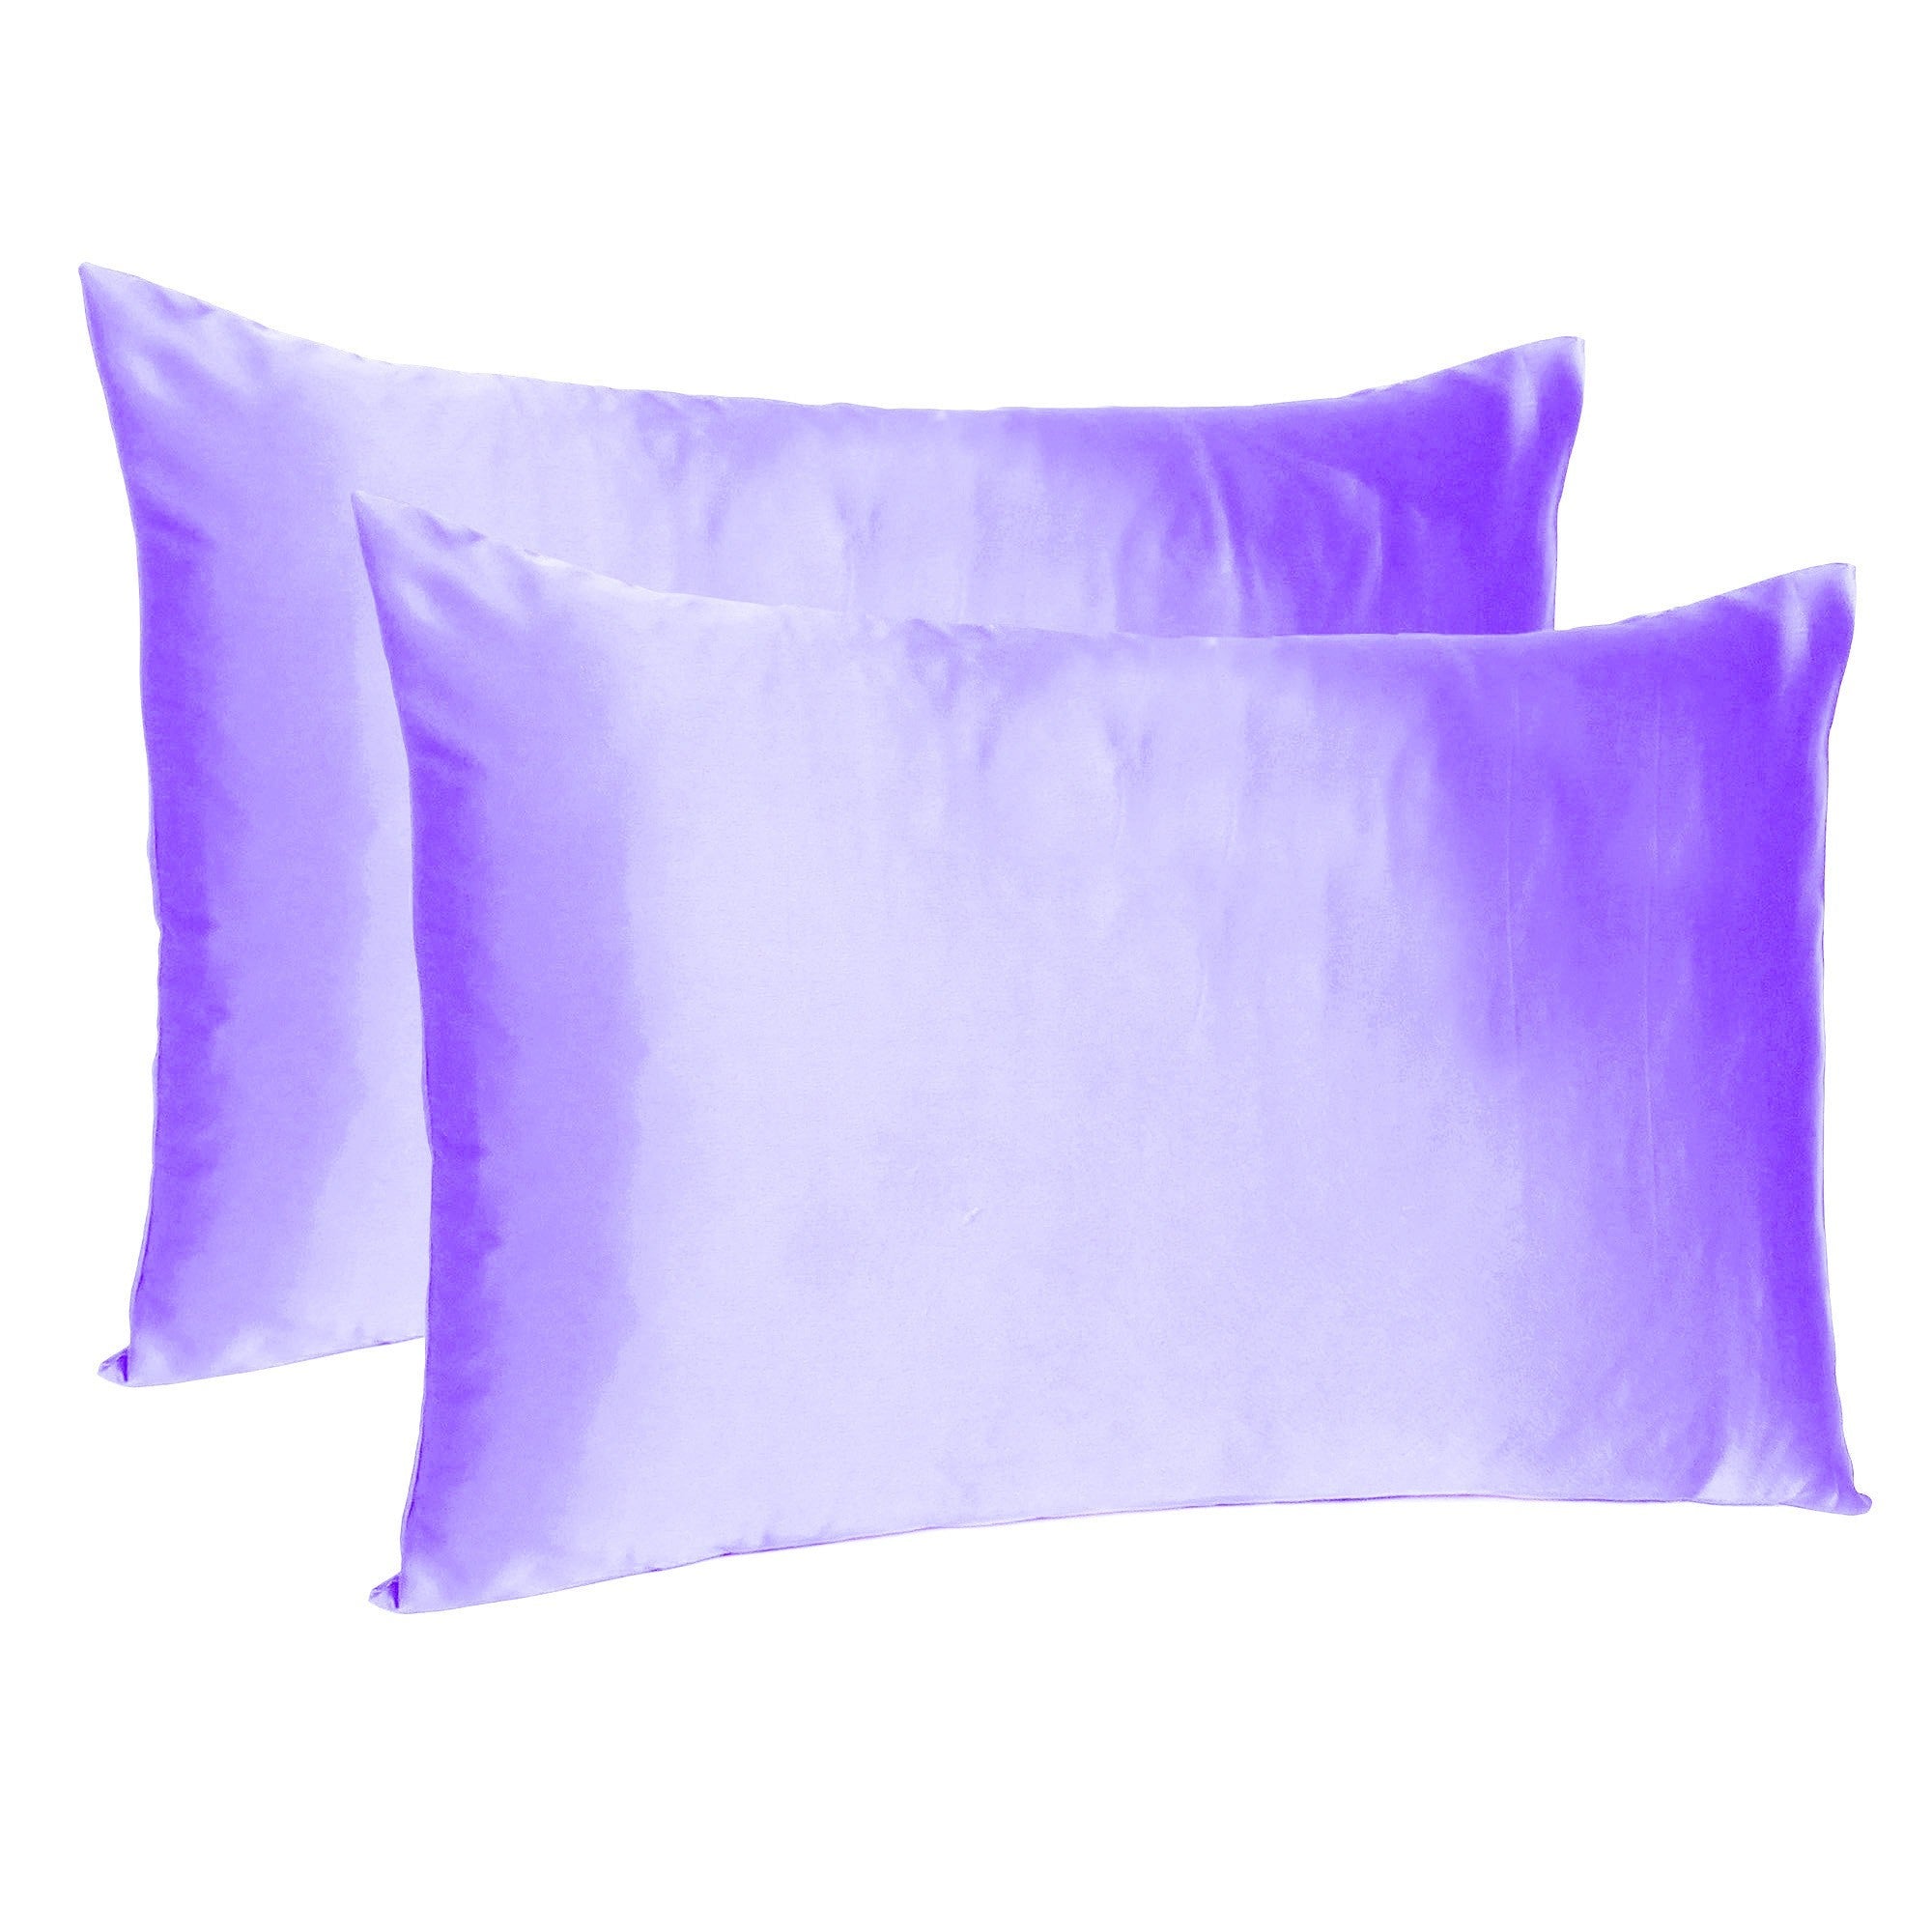 Purple-Dreamy-Set-Of-2-Silky-Satin-King-Pillowcases-Bed-Sheets